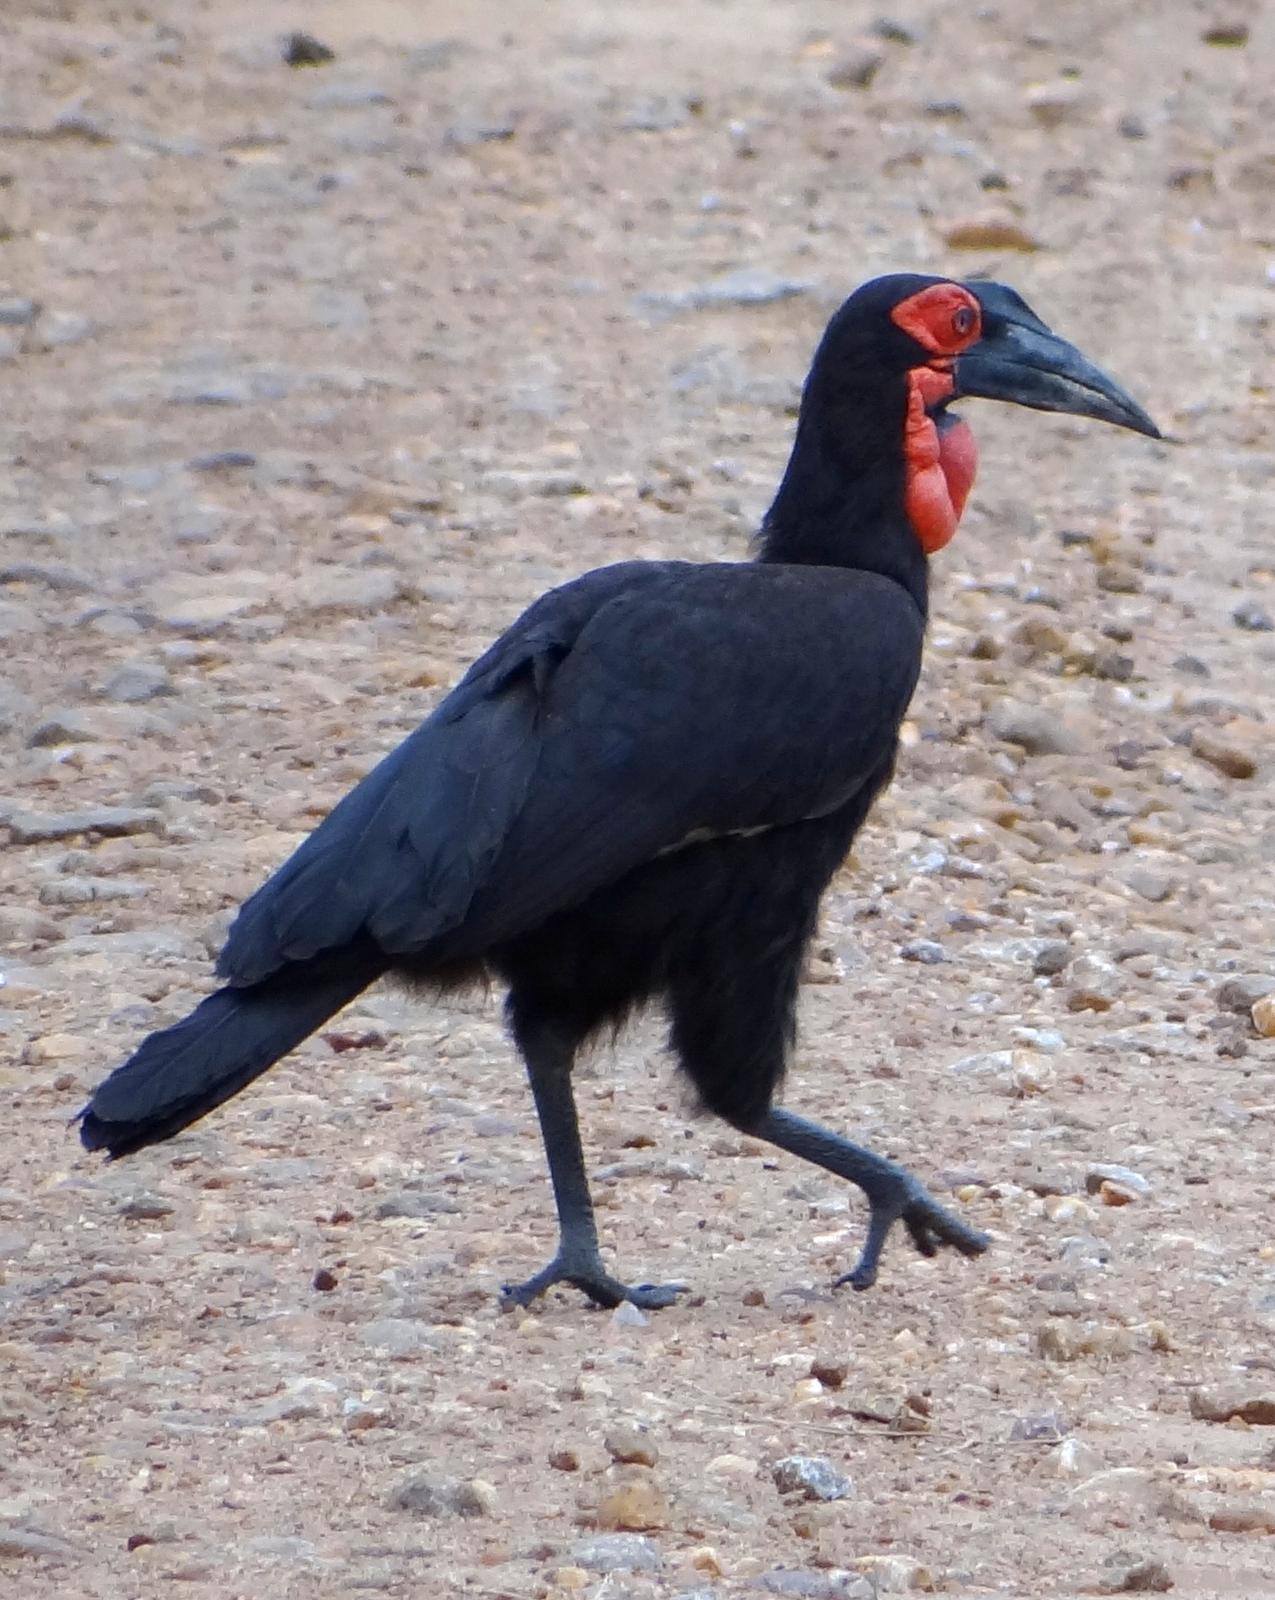 Southern Ground-Hornbill Photo by Todd A. Watkins